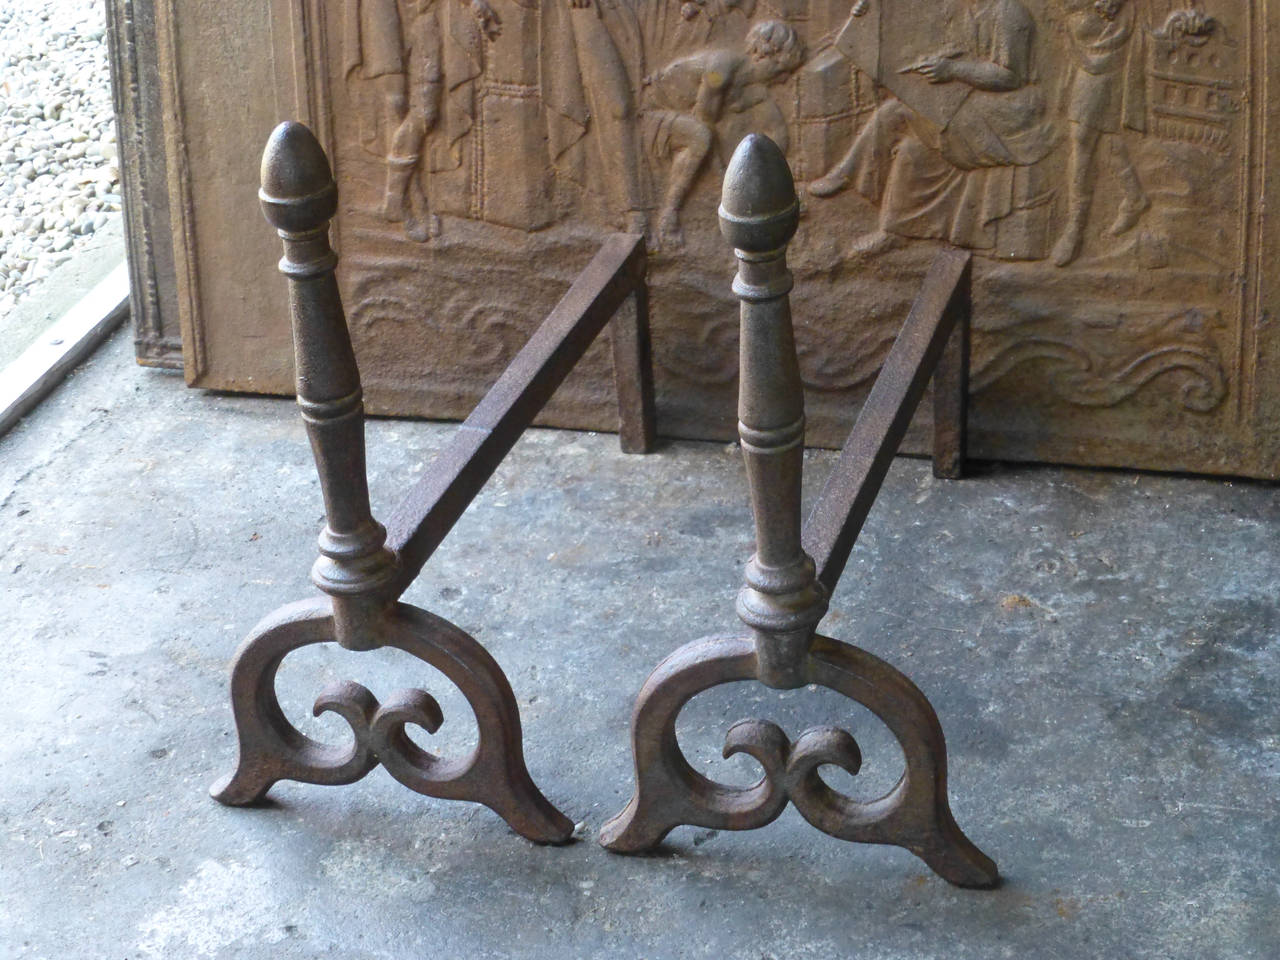 Rare, heavy pair of cast iron andirons or firedogs. 19th Century English Victorian.

We have a unique and specialized collection of antique and used fireplace accessories consisting of more than 1000 listings at 1stdibs. Amongst others we always